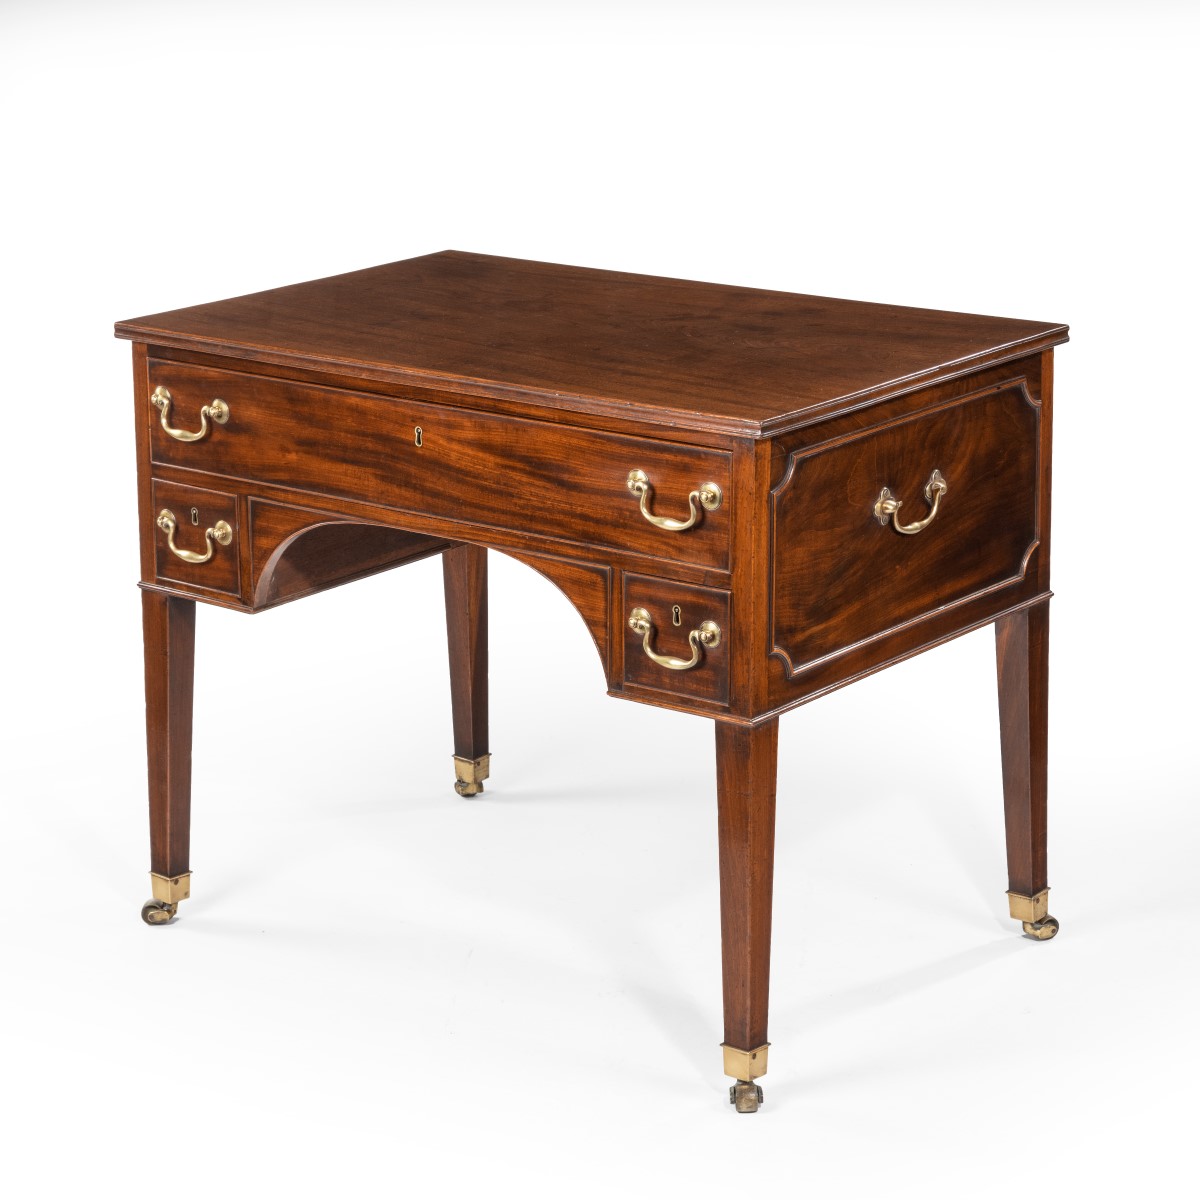 A George III free-standing mahogany architect’s desk